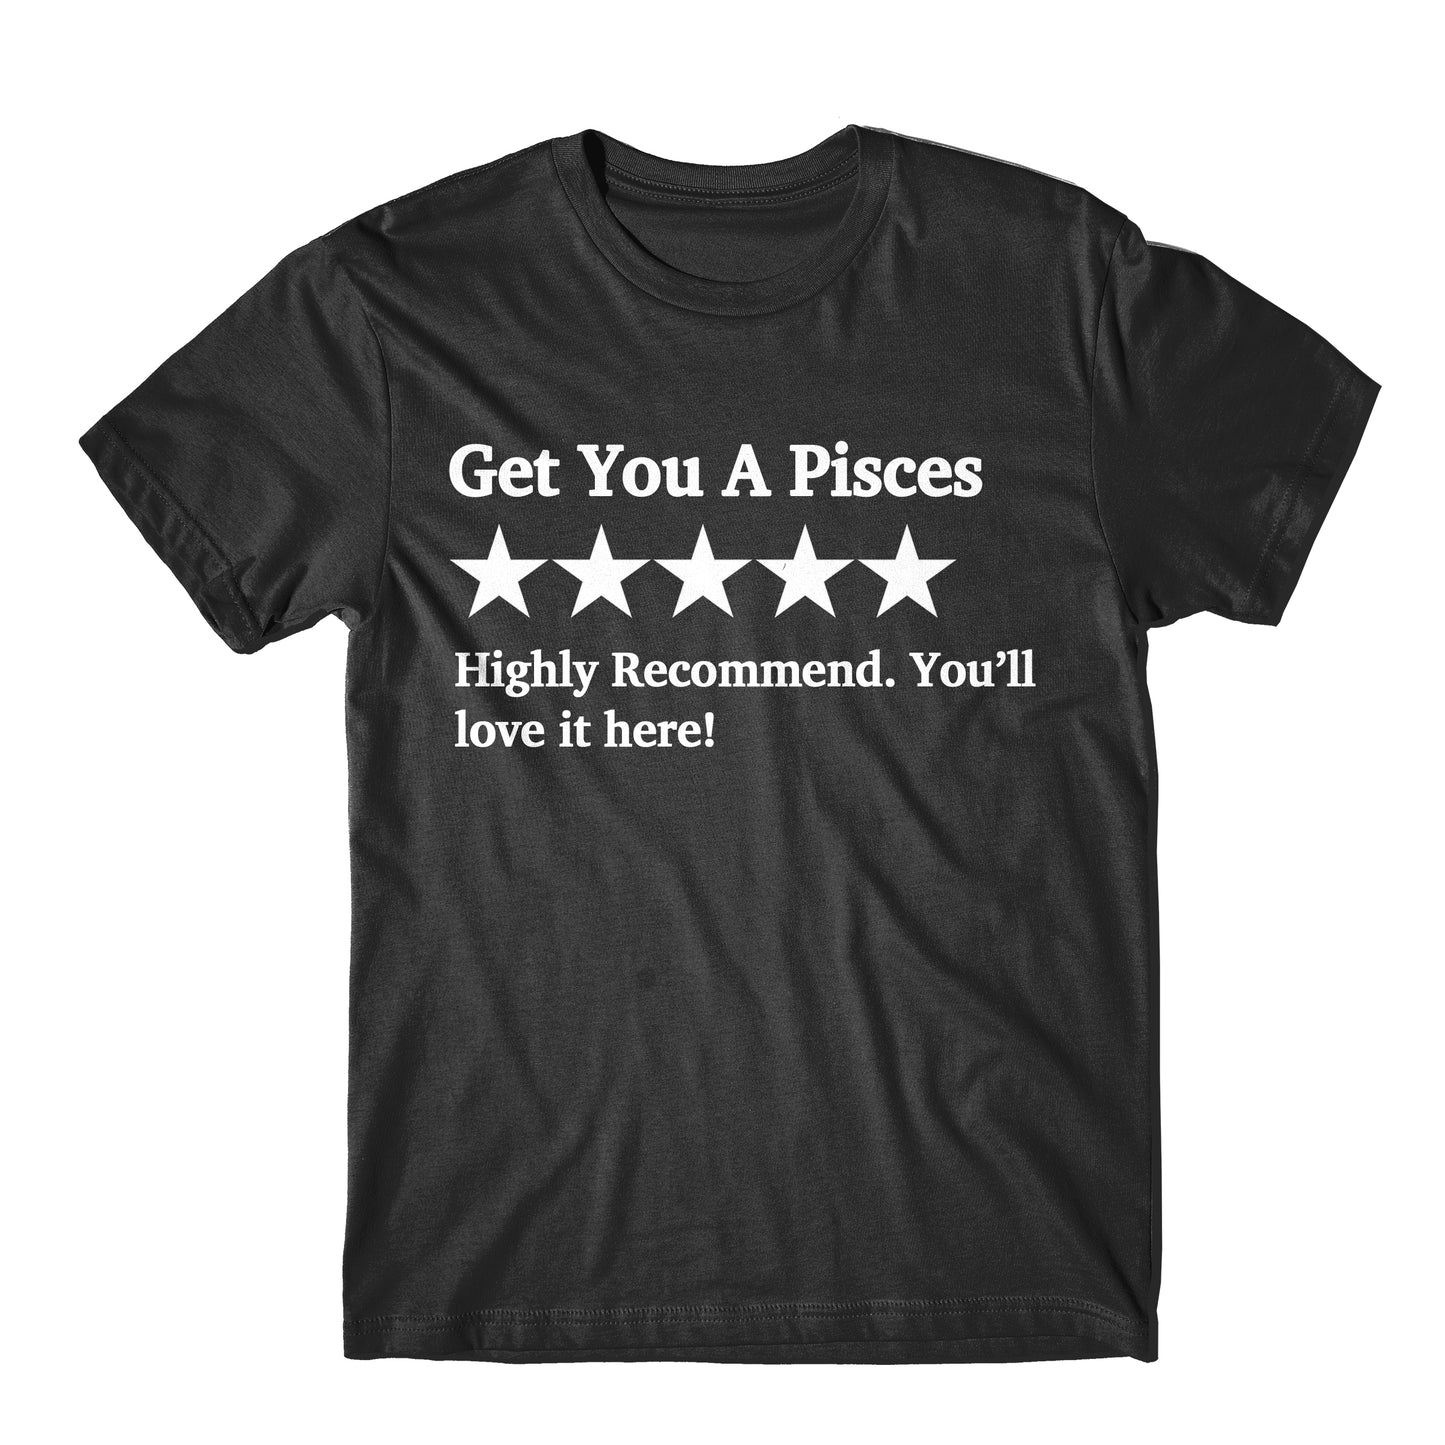 "Get You A Pisces Five Star Rating" Tee